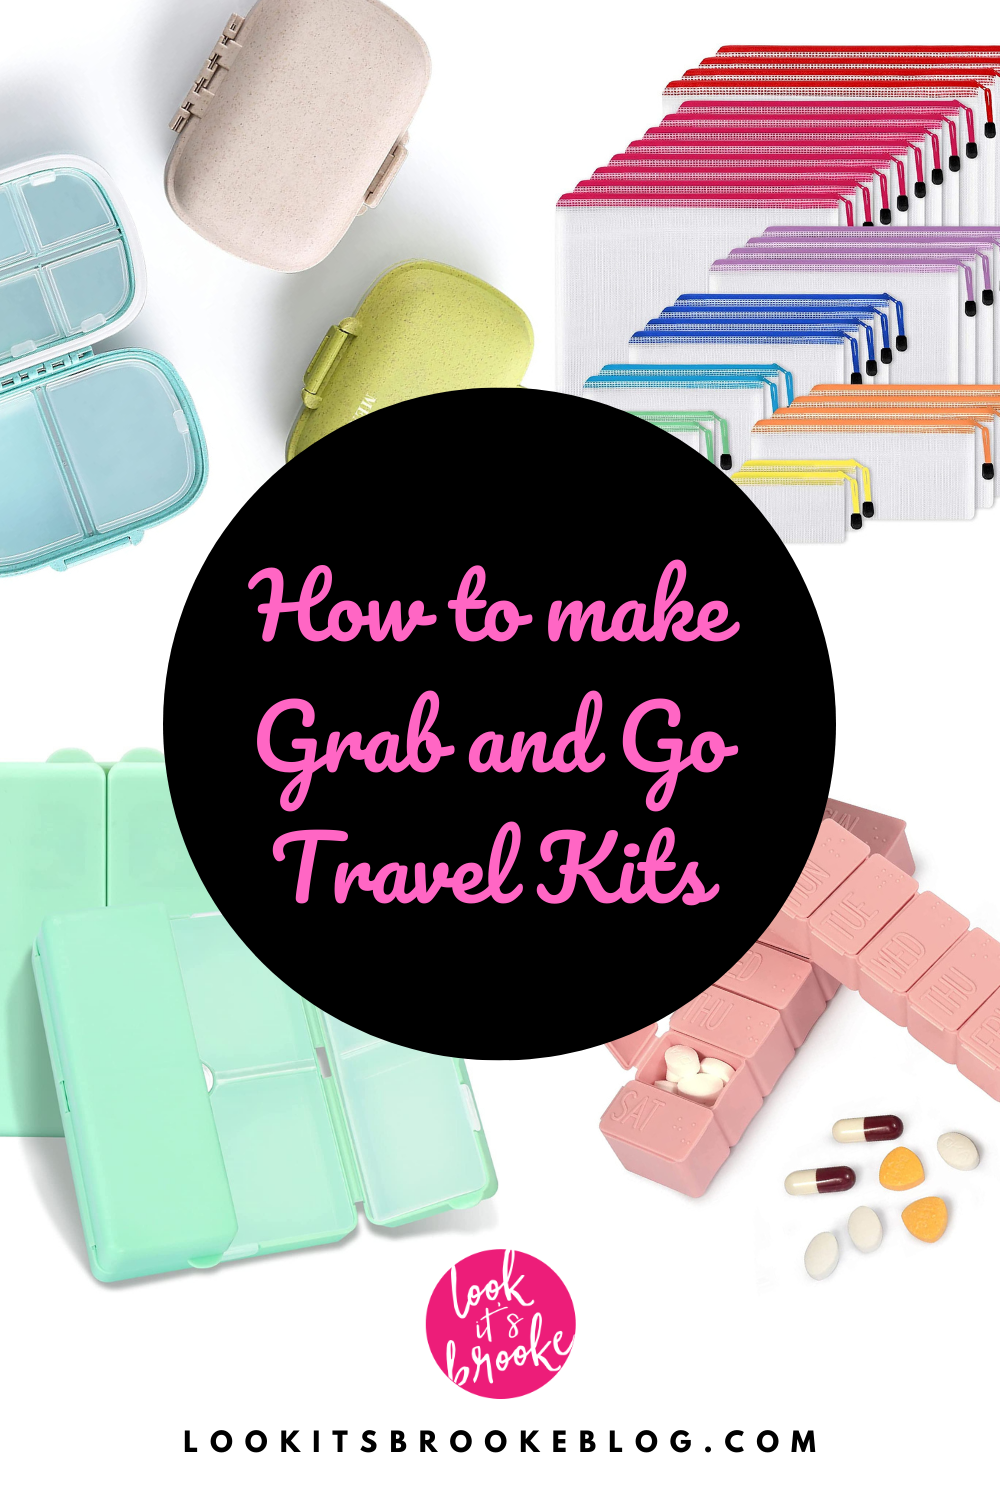 Travel Grab and Go Kits, Look It's Brooke, Travel Deals and Travel Feels